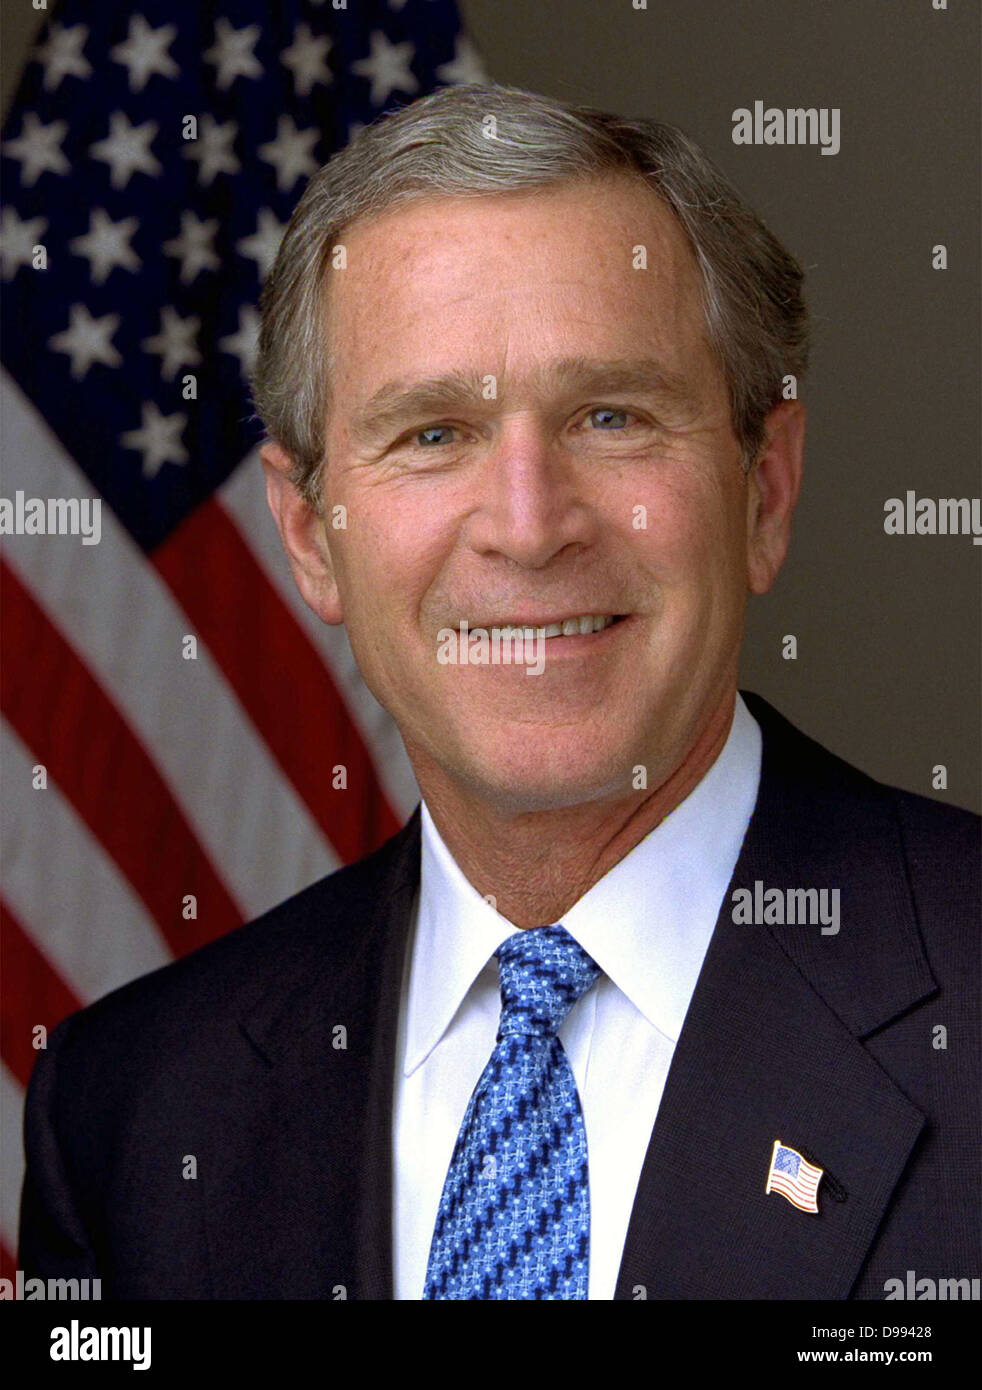 George Walker Bush (born 1946) 43rd President of the United States 2001-2009. 46th Governor of Texas 1995-2000. Head-and-shoulders portrait with stars-and-stripes in background. American Politician Republican Stock Photo